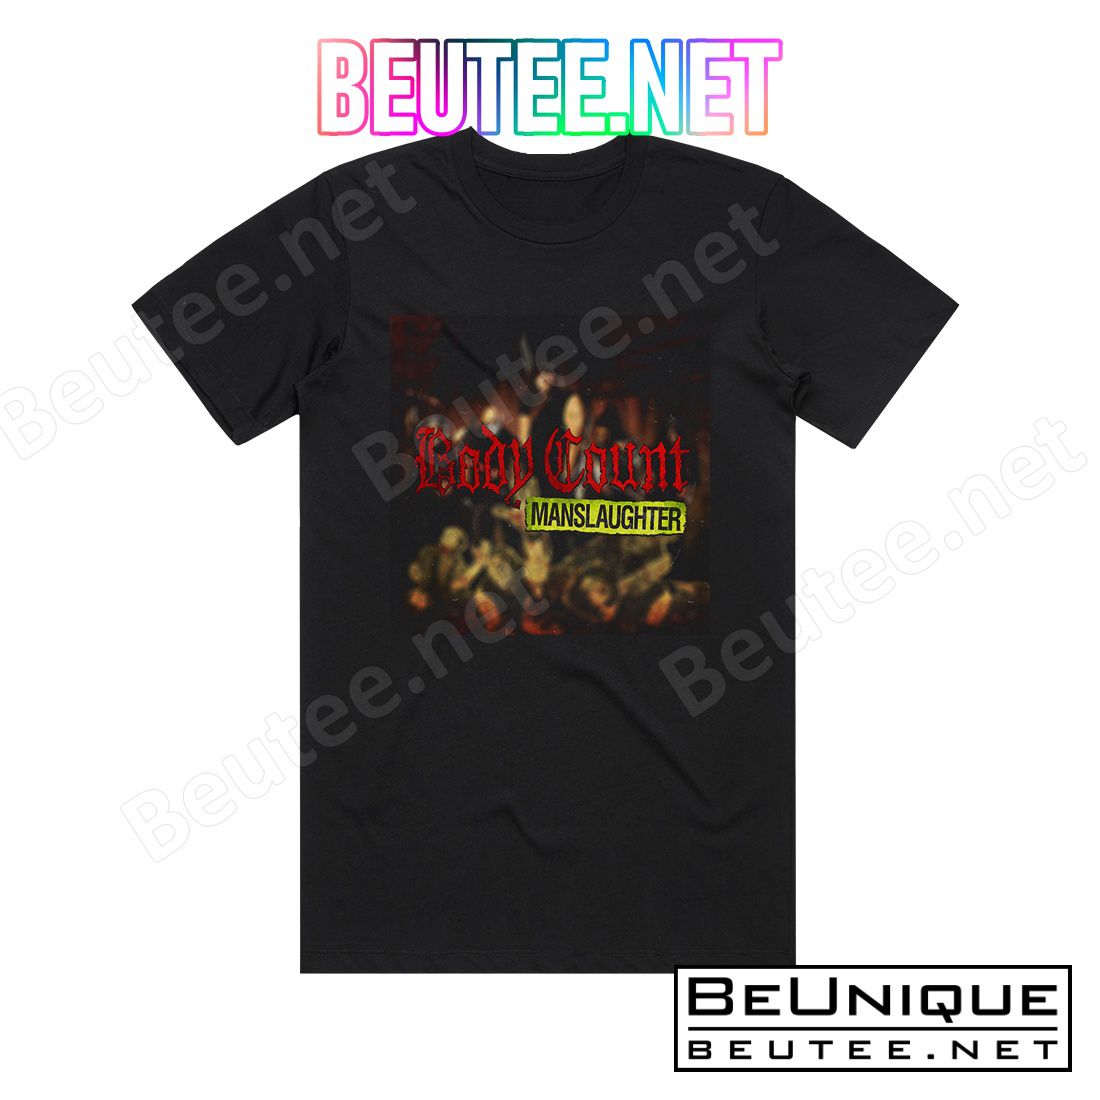 Body Count Manslaughter 2 Album Cover T-Shirt